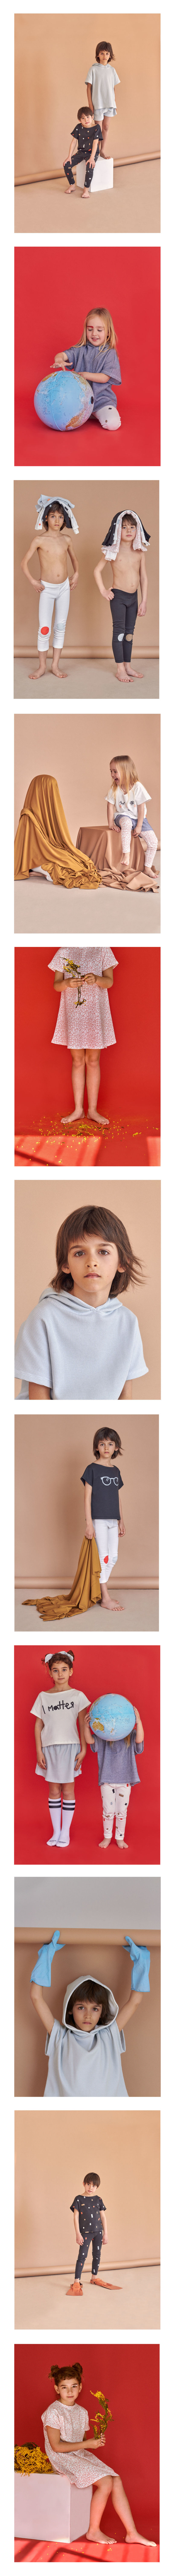 Hilittle SS18 Campaign -1